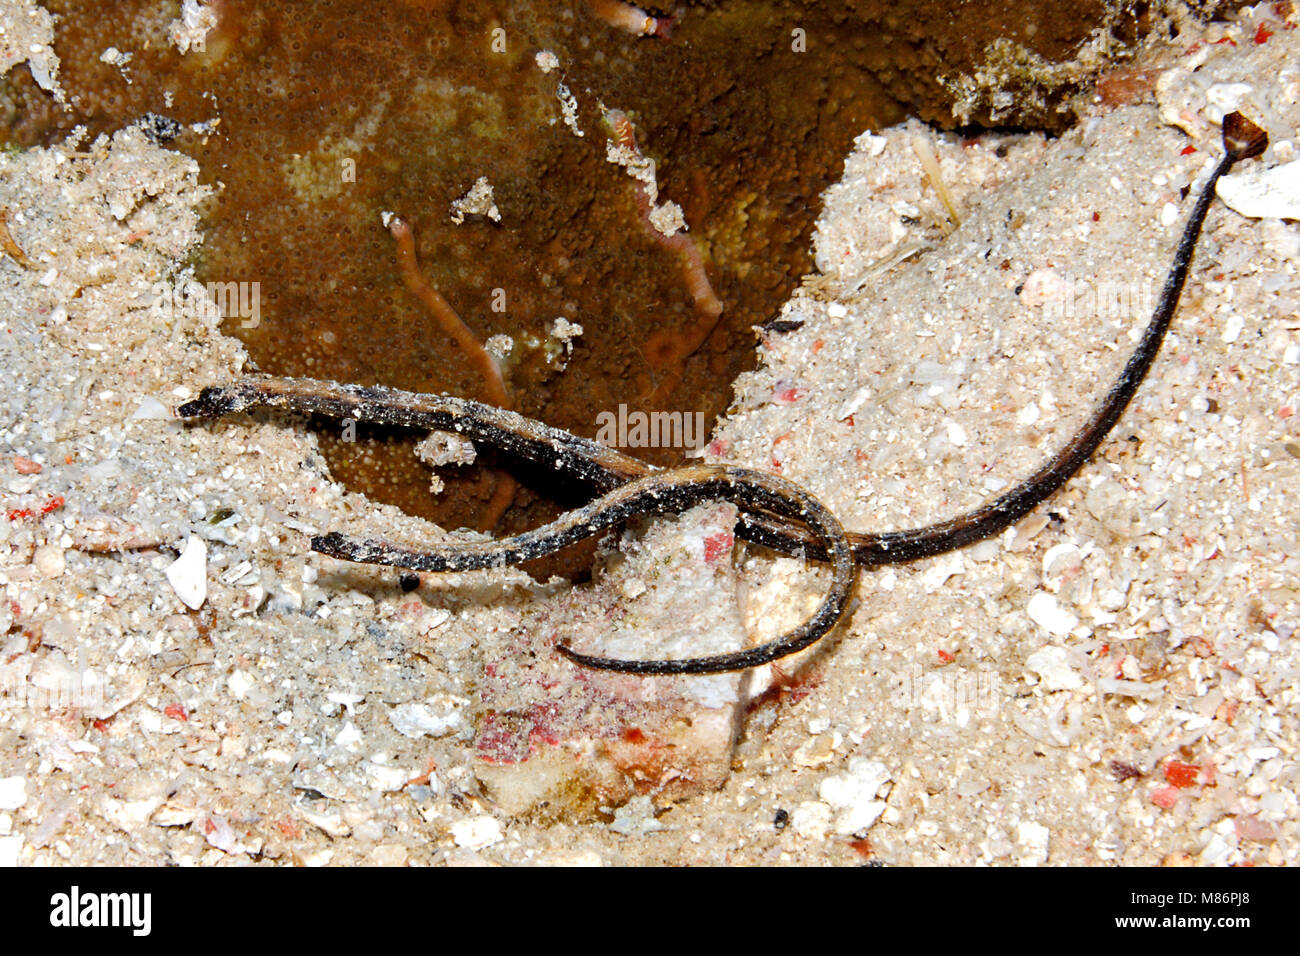 Two Pipefish, Halicampus sp. These pipefish appear to be an undescribed species. Stock Photo